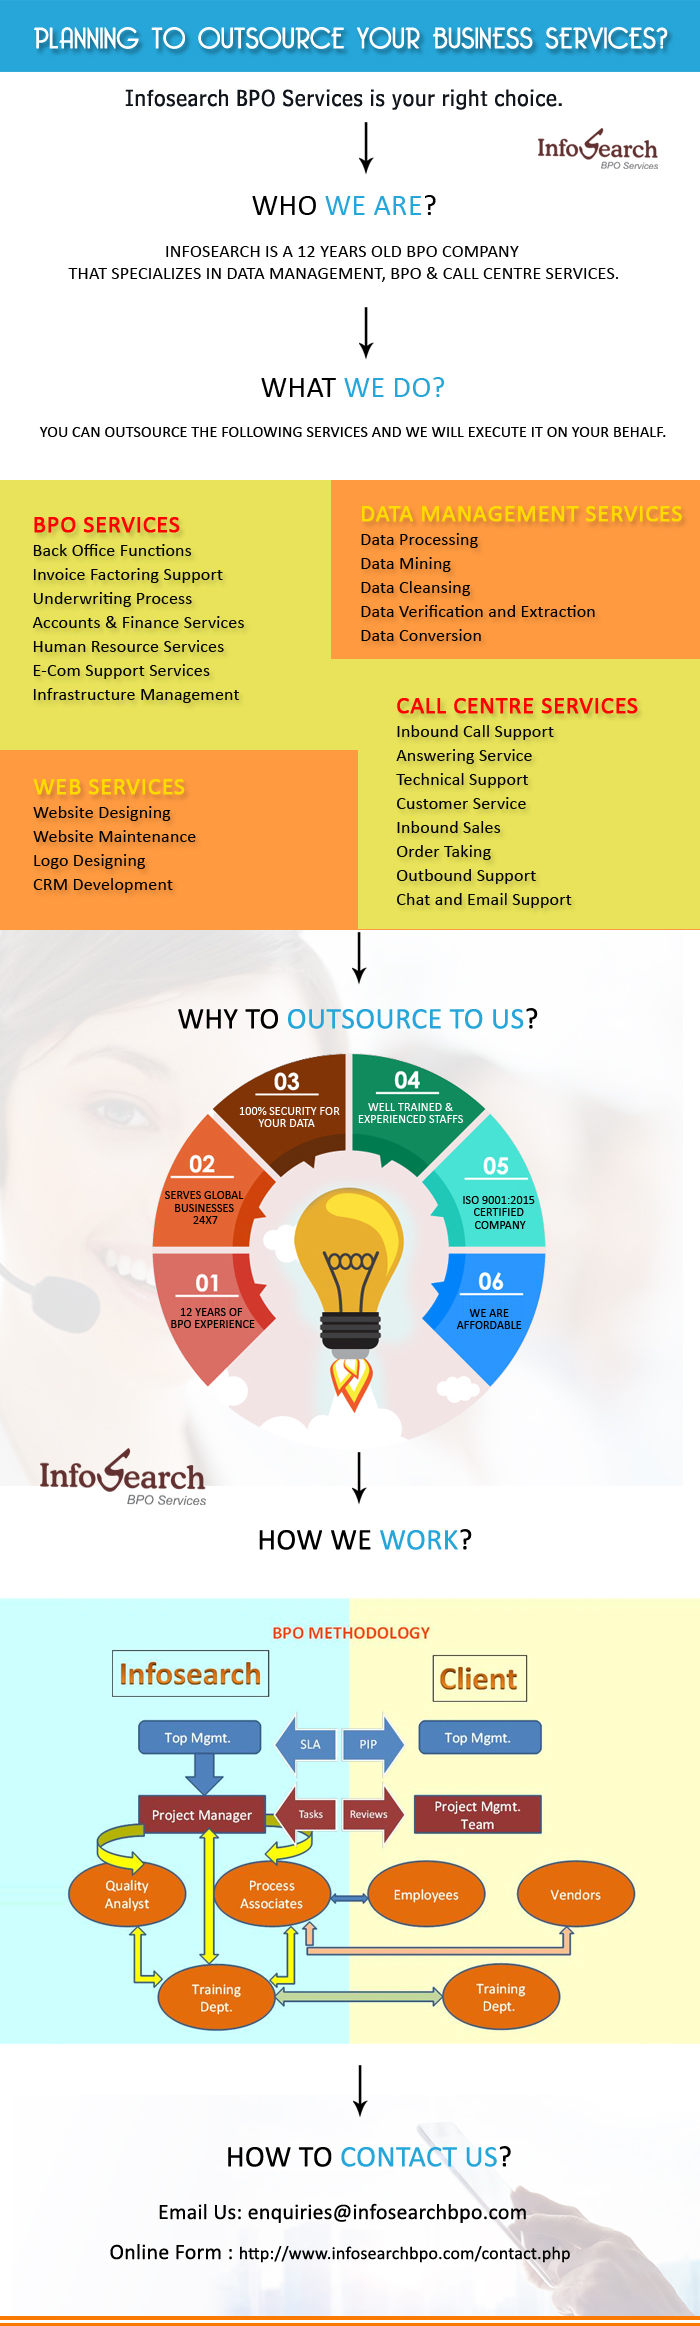 Outsourcing Services at Infosearch